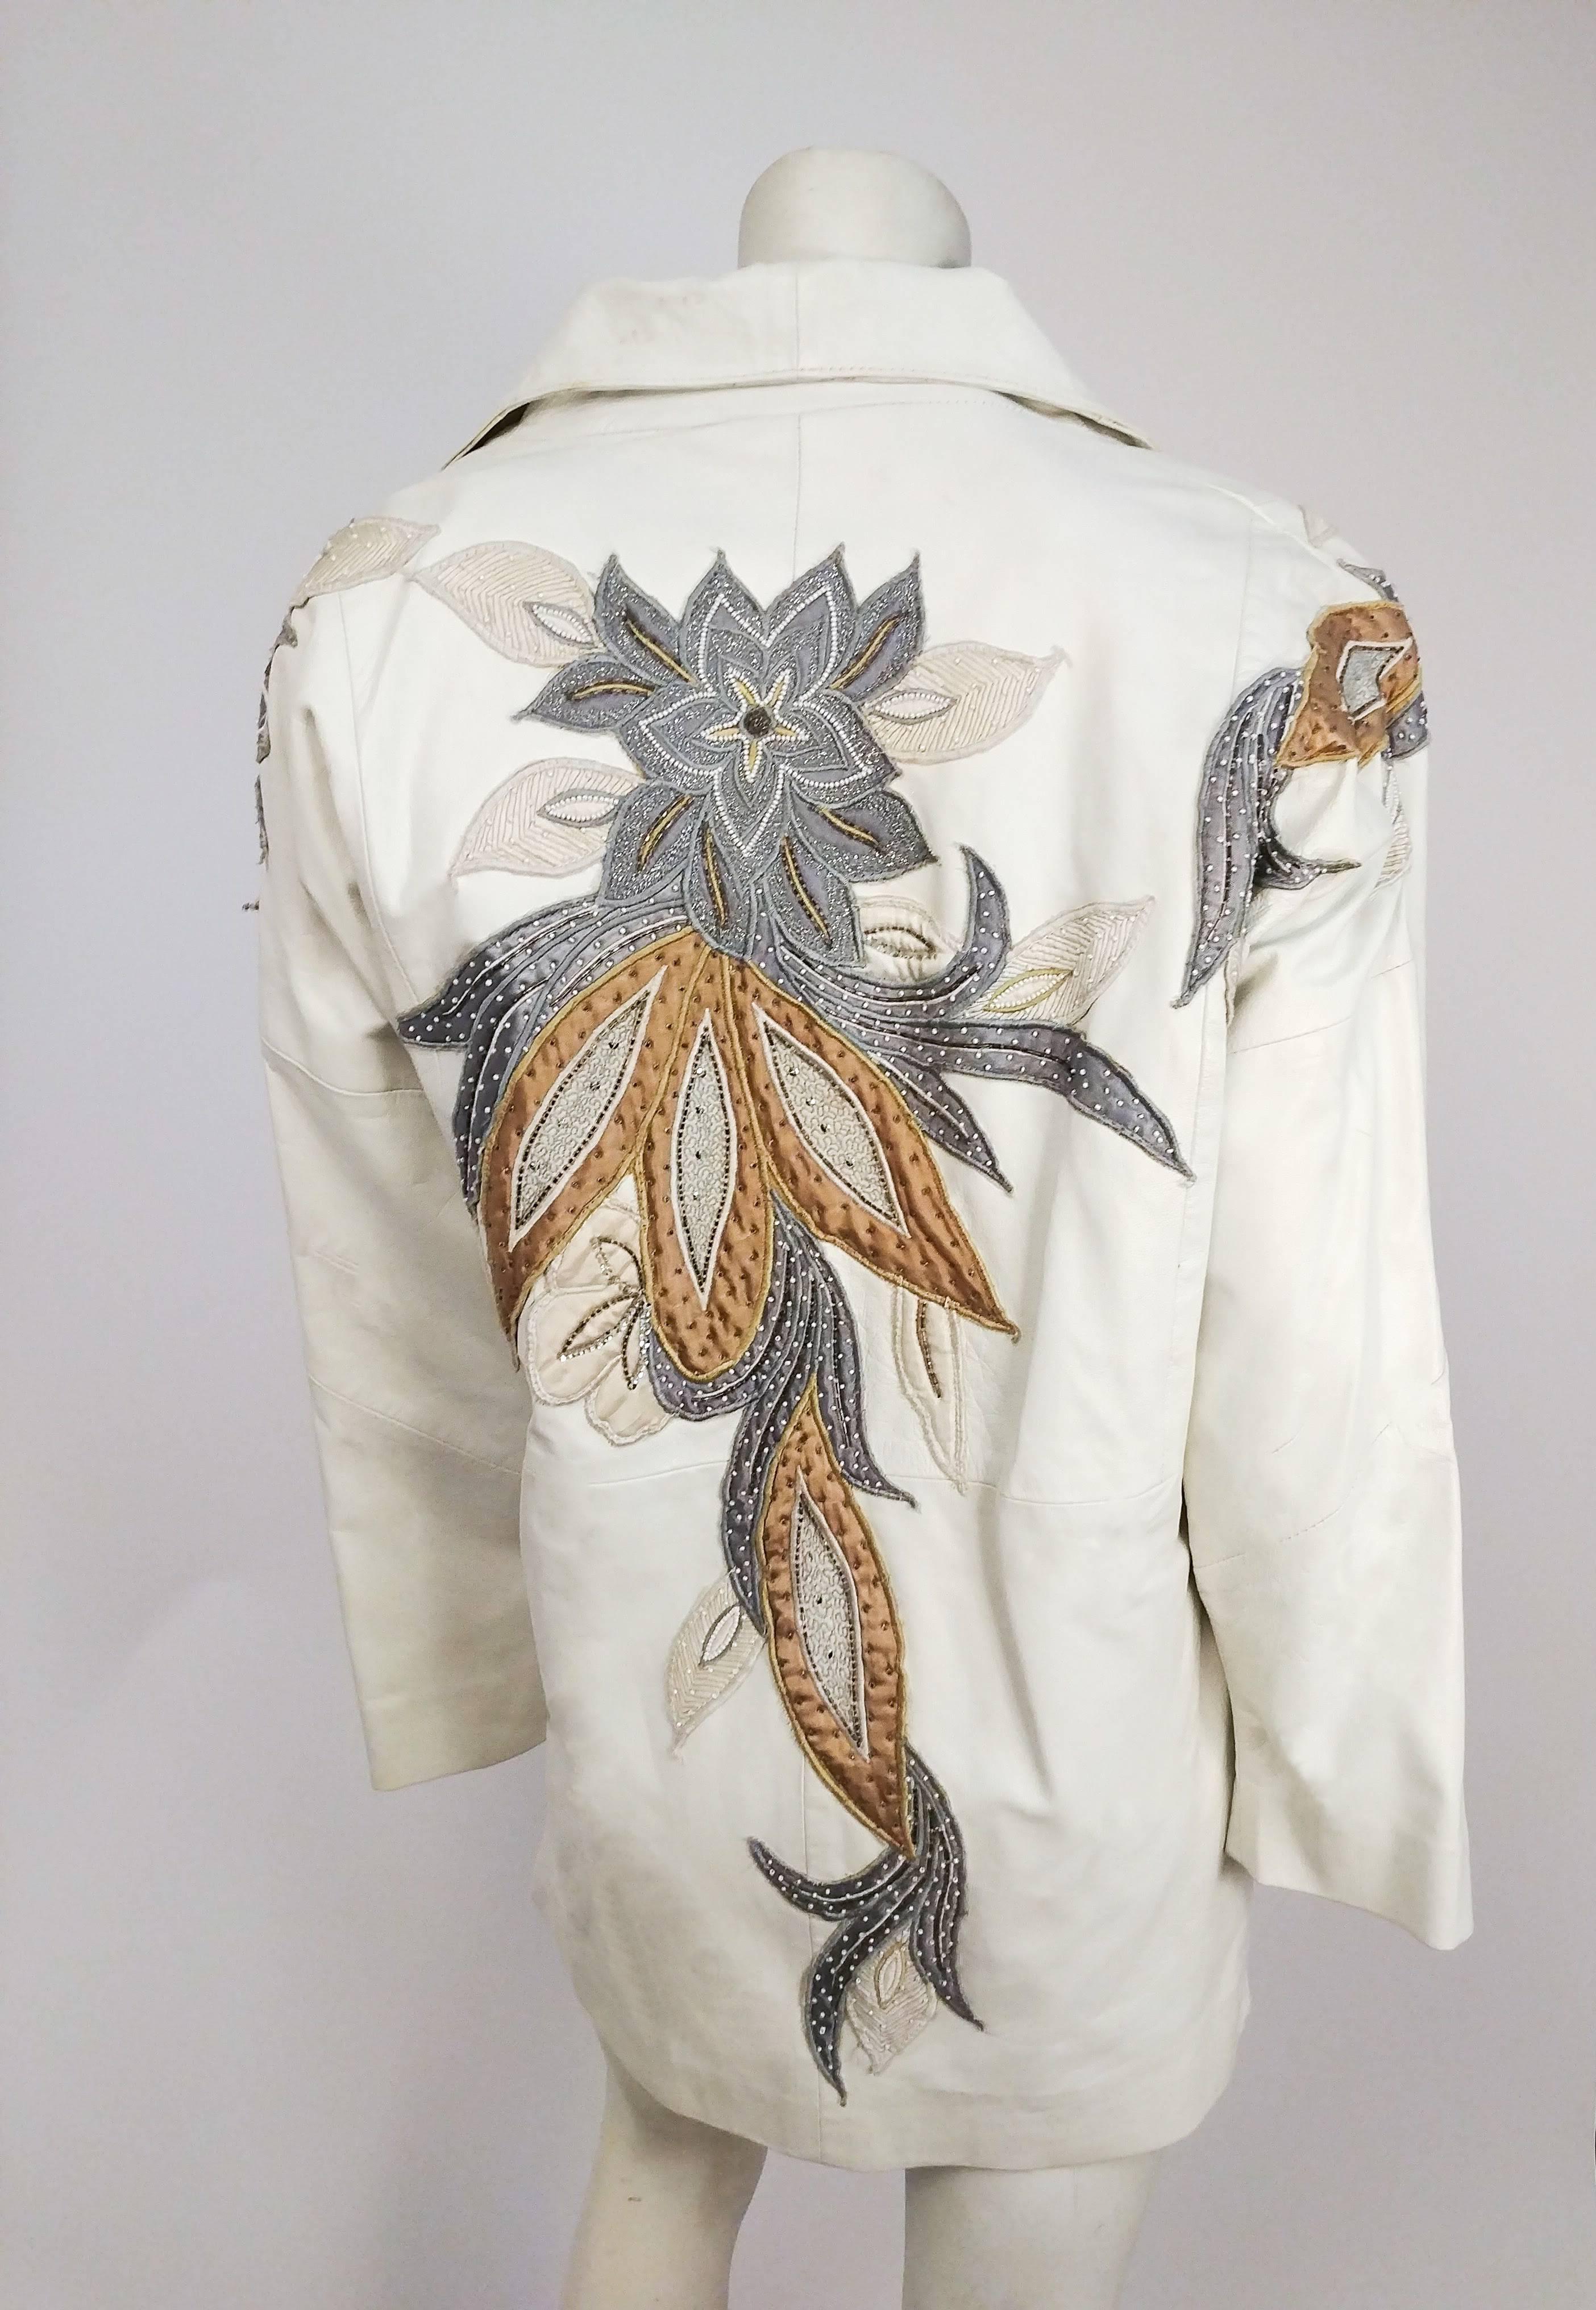 1980s Judith Ann White Leather Jacket. Wide lapels, no closures. Asymmetrical flower applique design on shoulders and back. Cocoon coat shape with slouchy shoulders. 